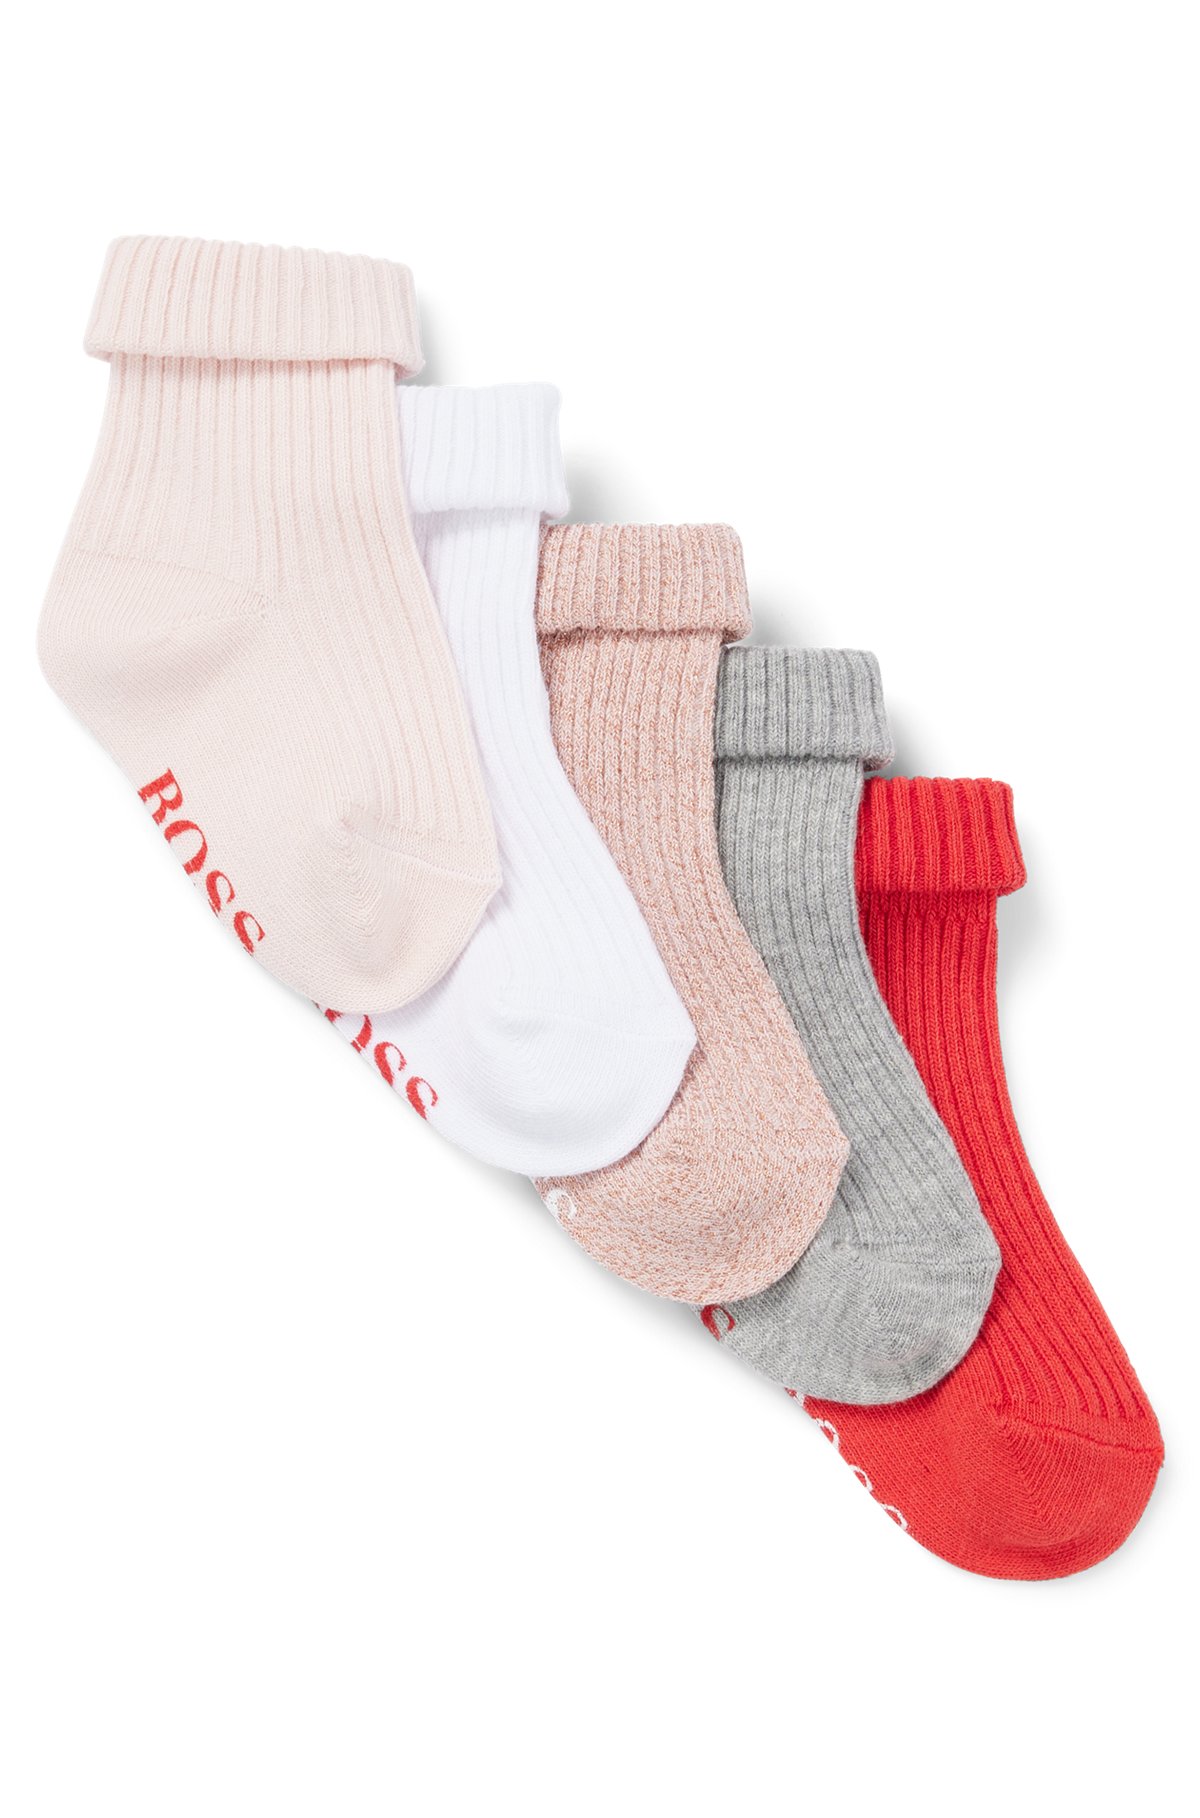 Under ~ Diktere Grusom BOSS - Gift-boxed set of five pairs of baby socks